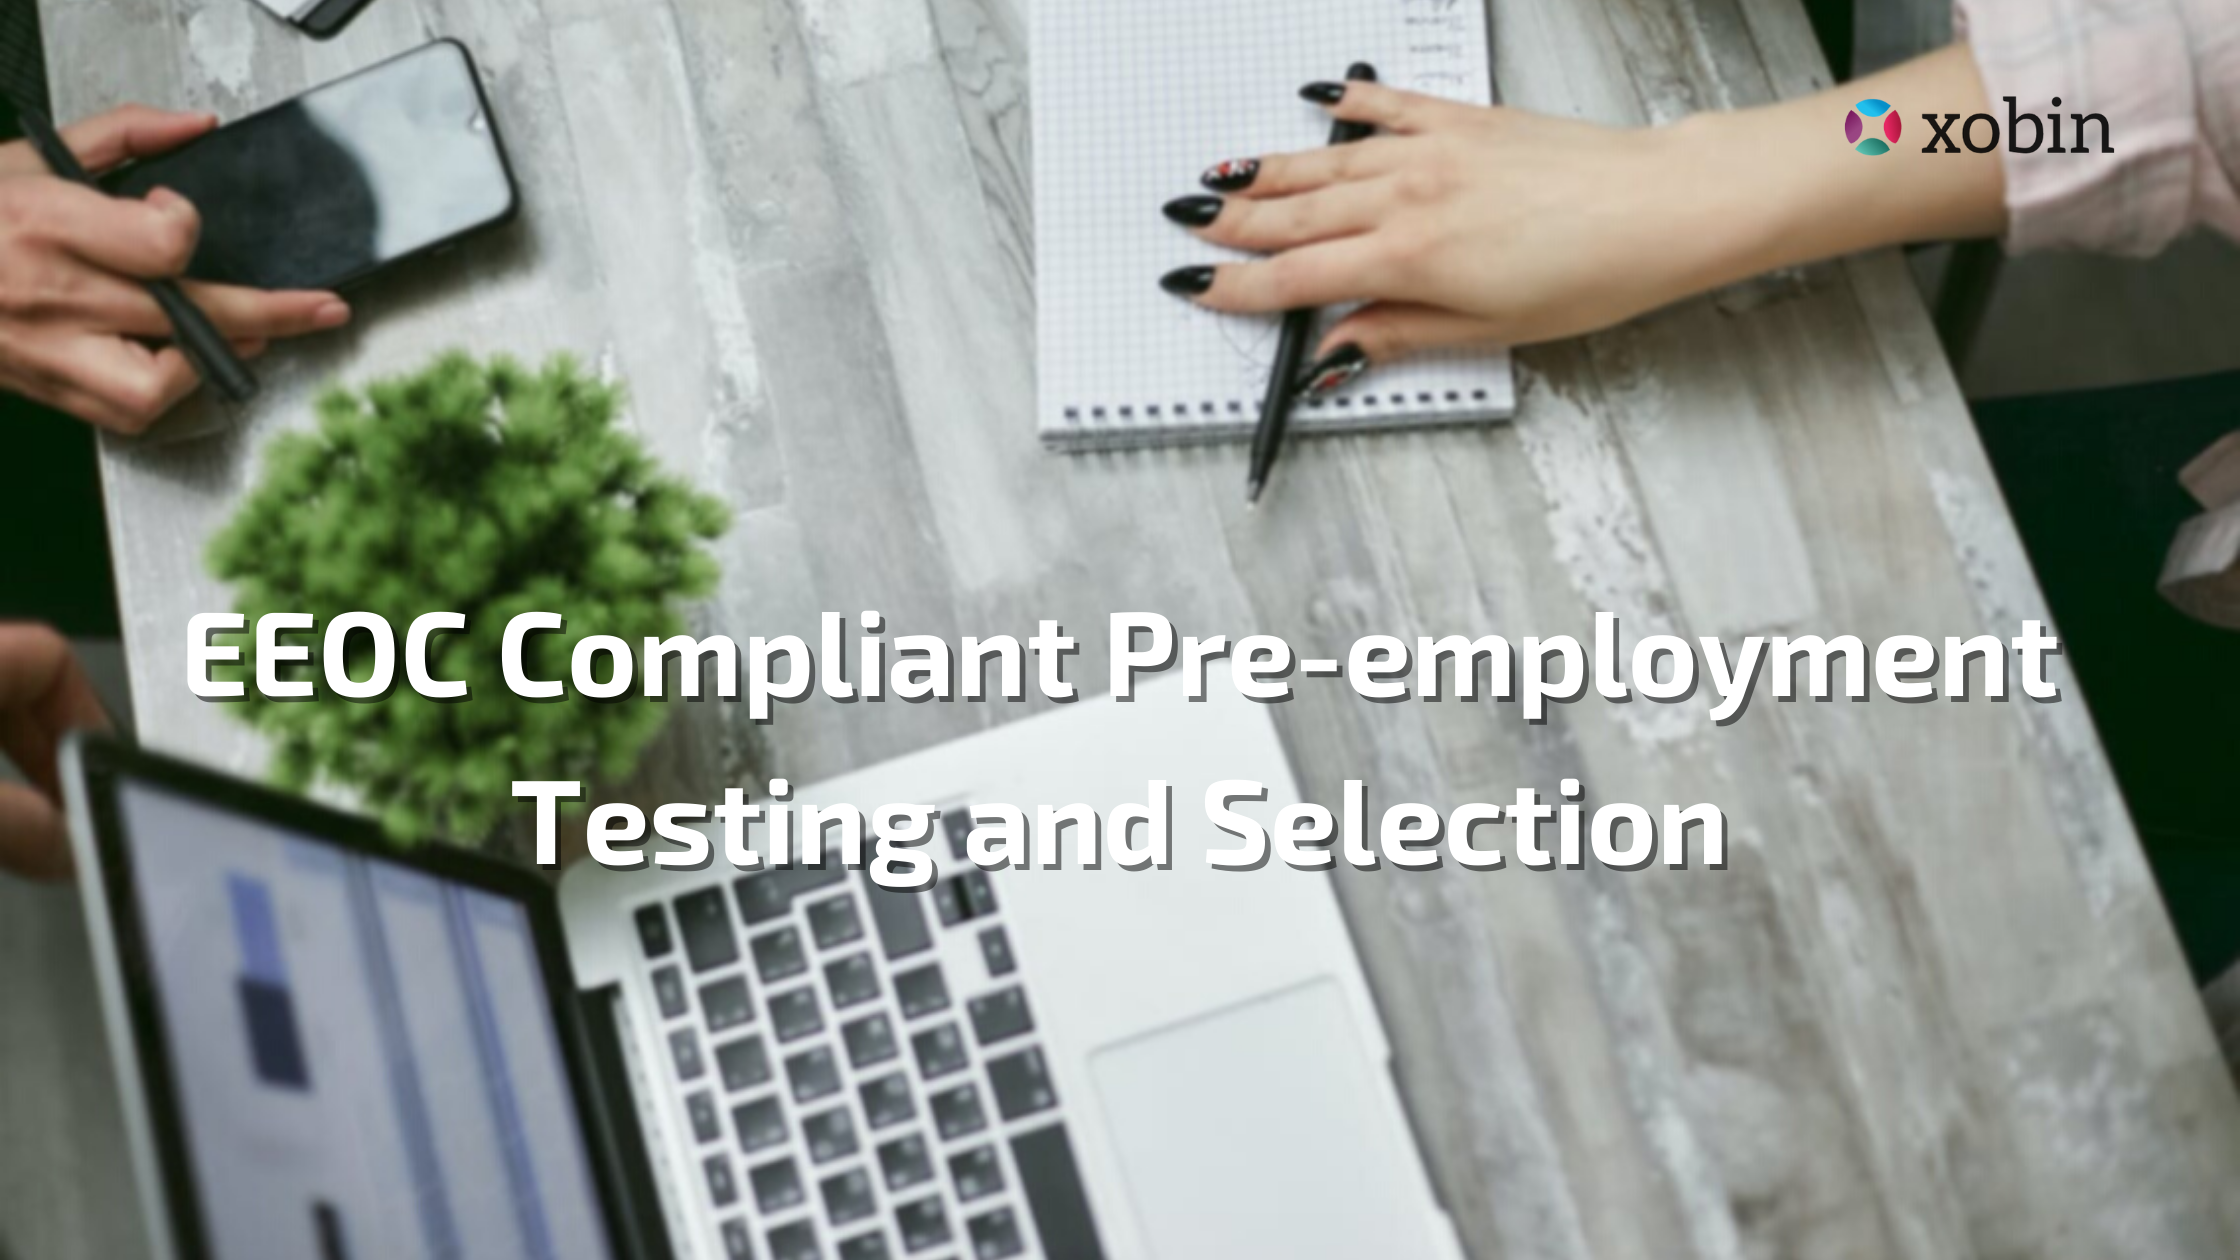 EEOC Compliant Pre-employment Testing and Selection